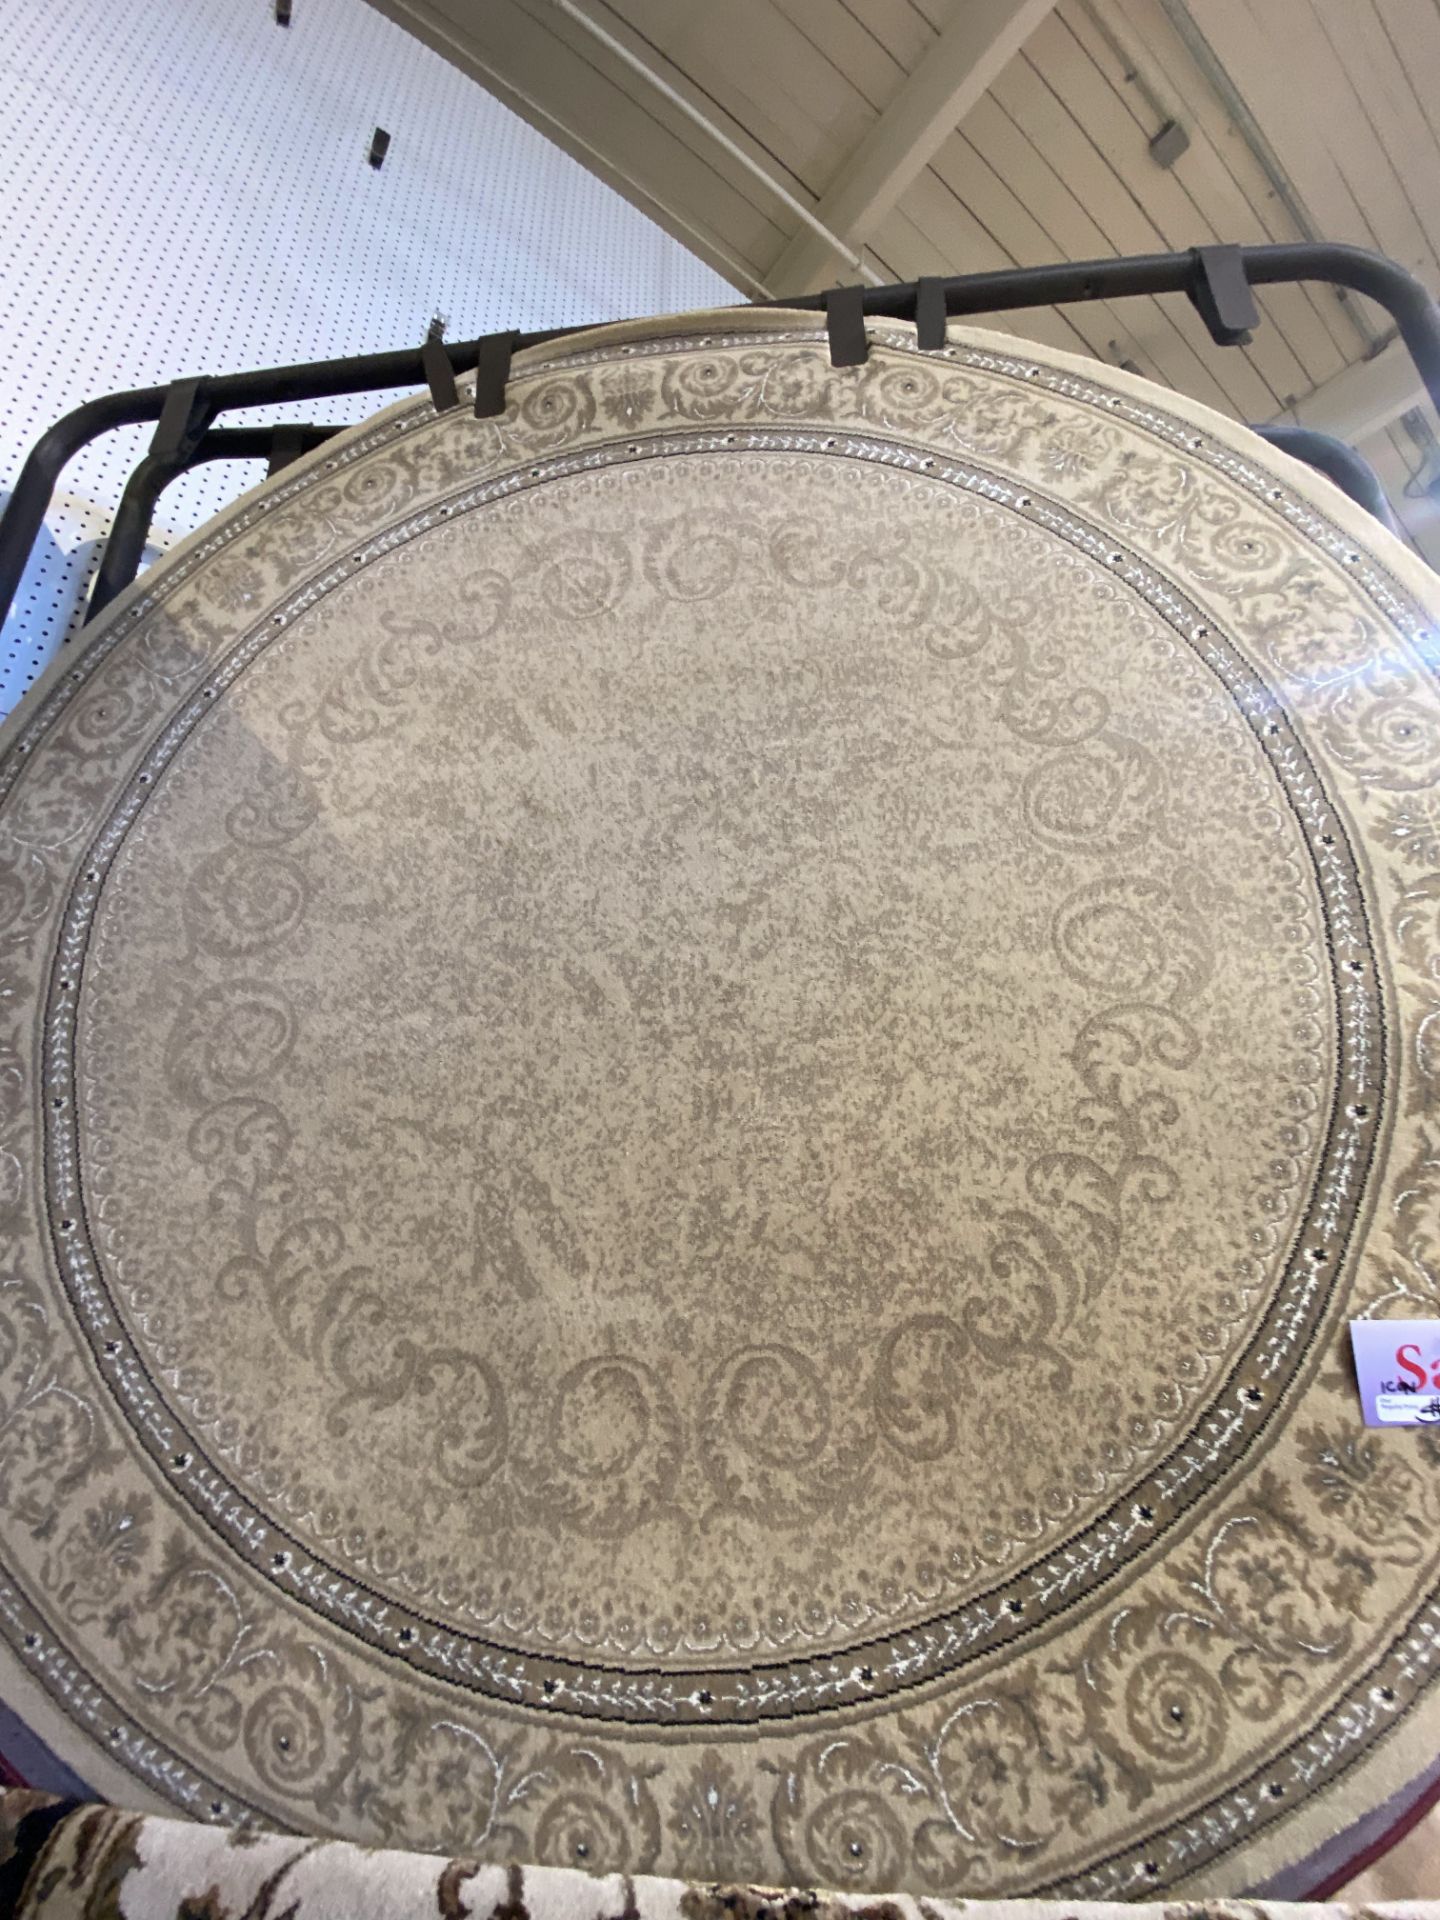 APPROX. 5' ROUND CARPET, ICON, MSRP $499